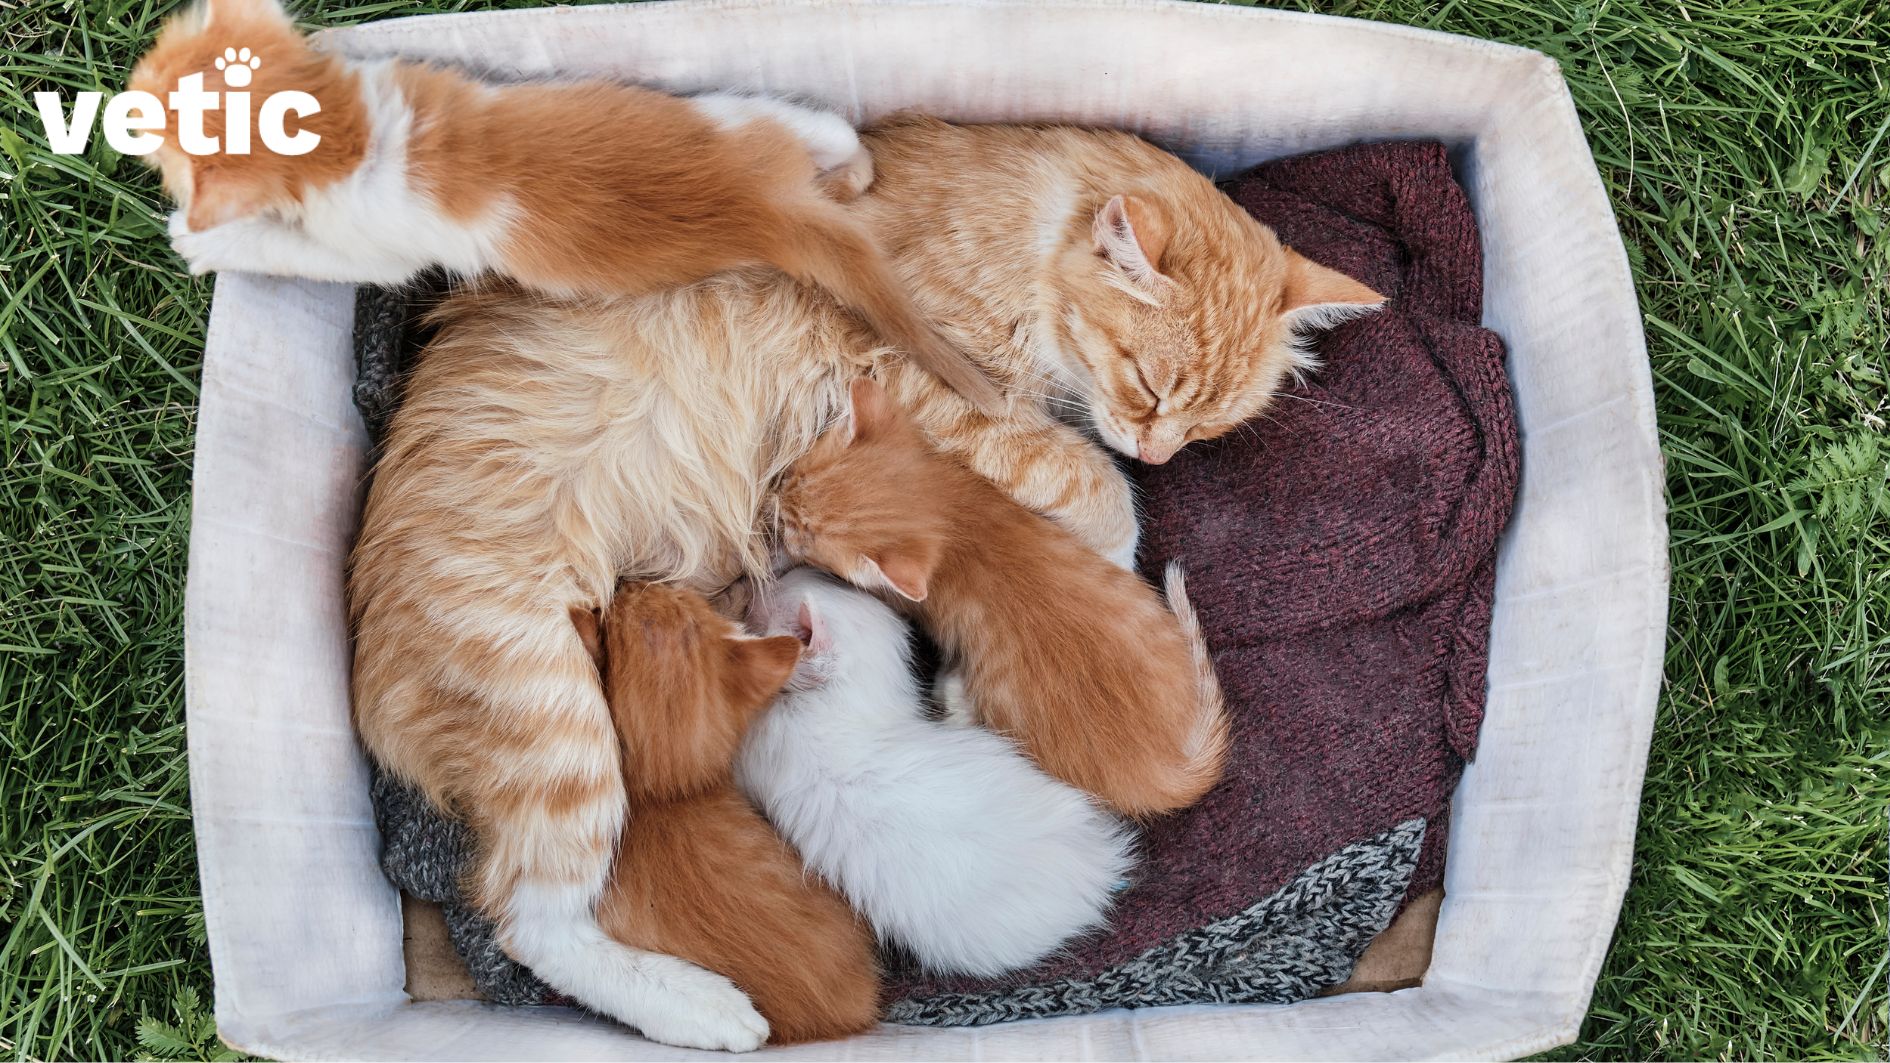 an orange-white mother cat feeding lying on her side in a bed lined with multiple warm knit blankets and feeding her 3 kittens. the fourth kitten is climbing over her back peeping from the edge of the bed. two kittens are orange, one is white and one is orange with white patches. the bed seems to be on a grassy surface.